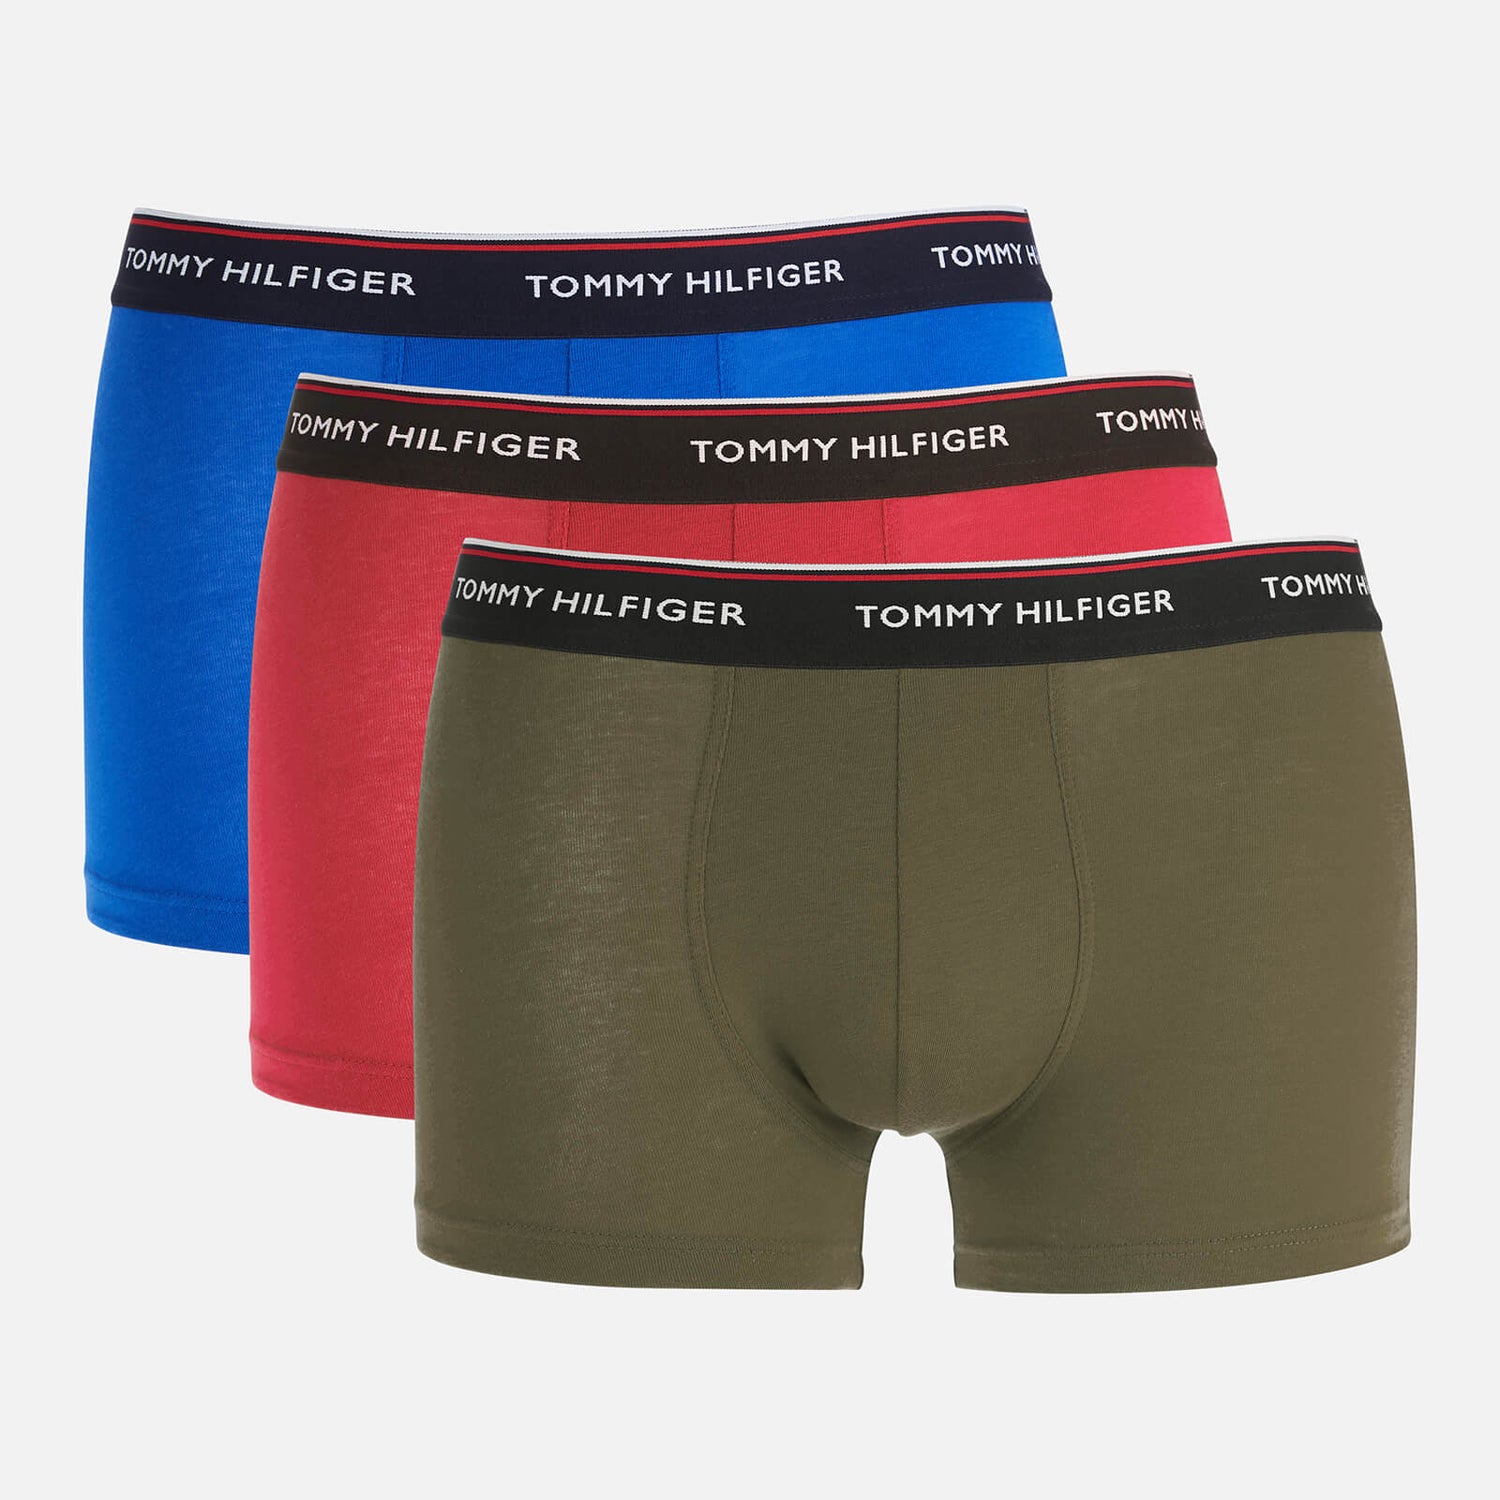 Tommy Hilfiger Men's 3 Pack Trunks - Electric Blue/Red Carmine/Army Green